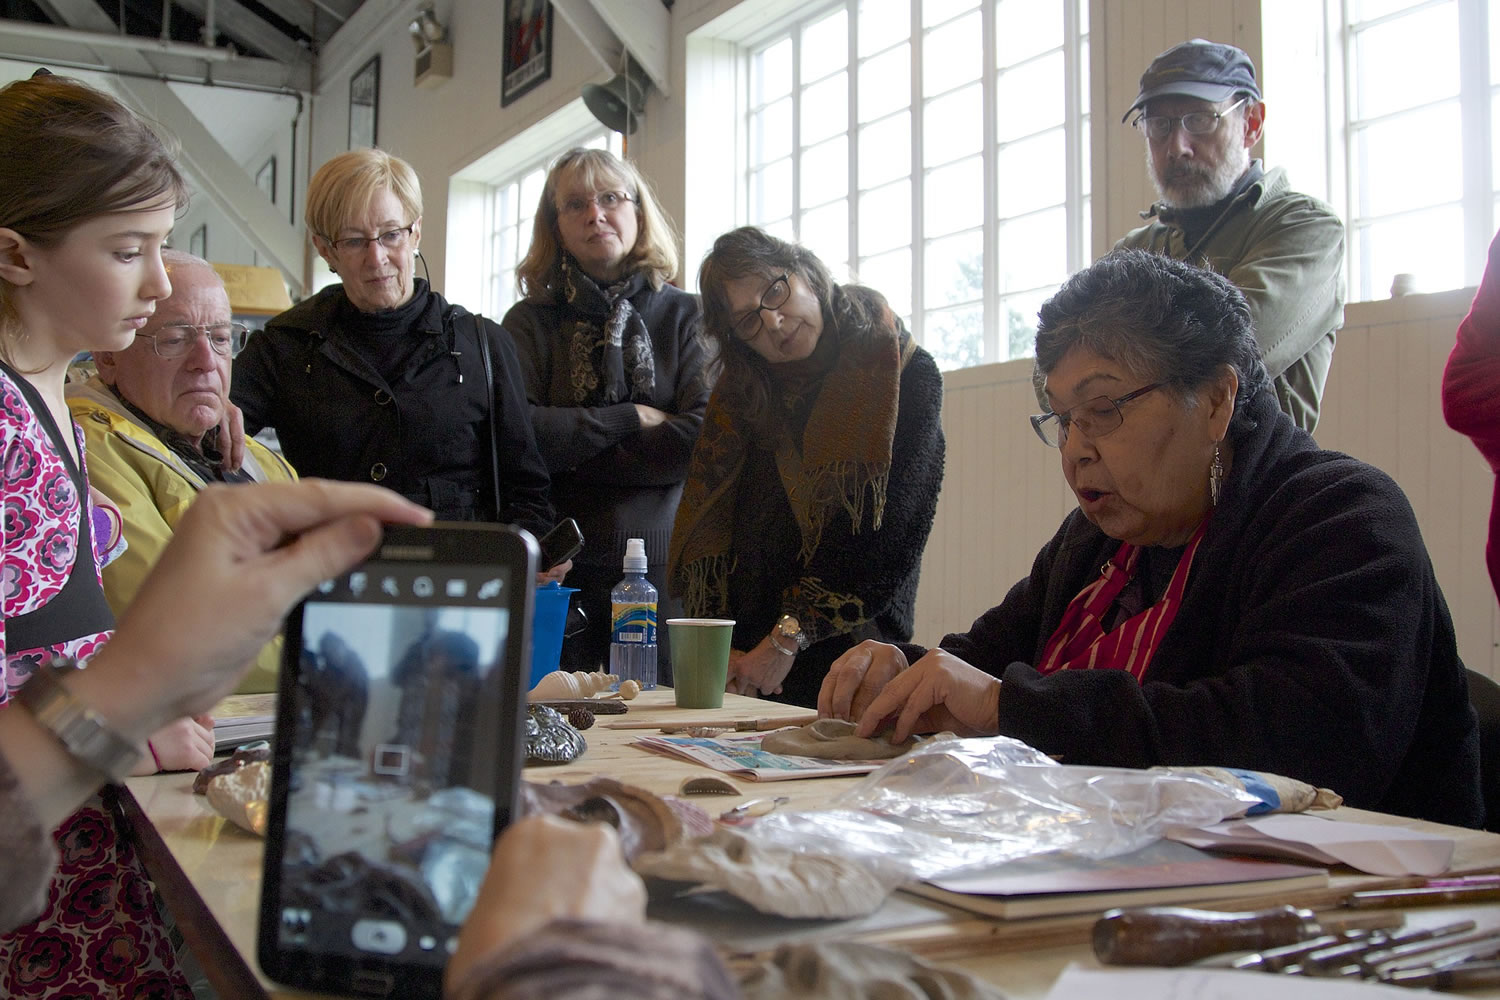 A crowd watches renowned artist Lillian Pitt demonstrate how to make a traditional Native American mask out of clay during a workshop at Pearson Air Museum in Vancouver on Saturday.